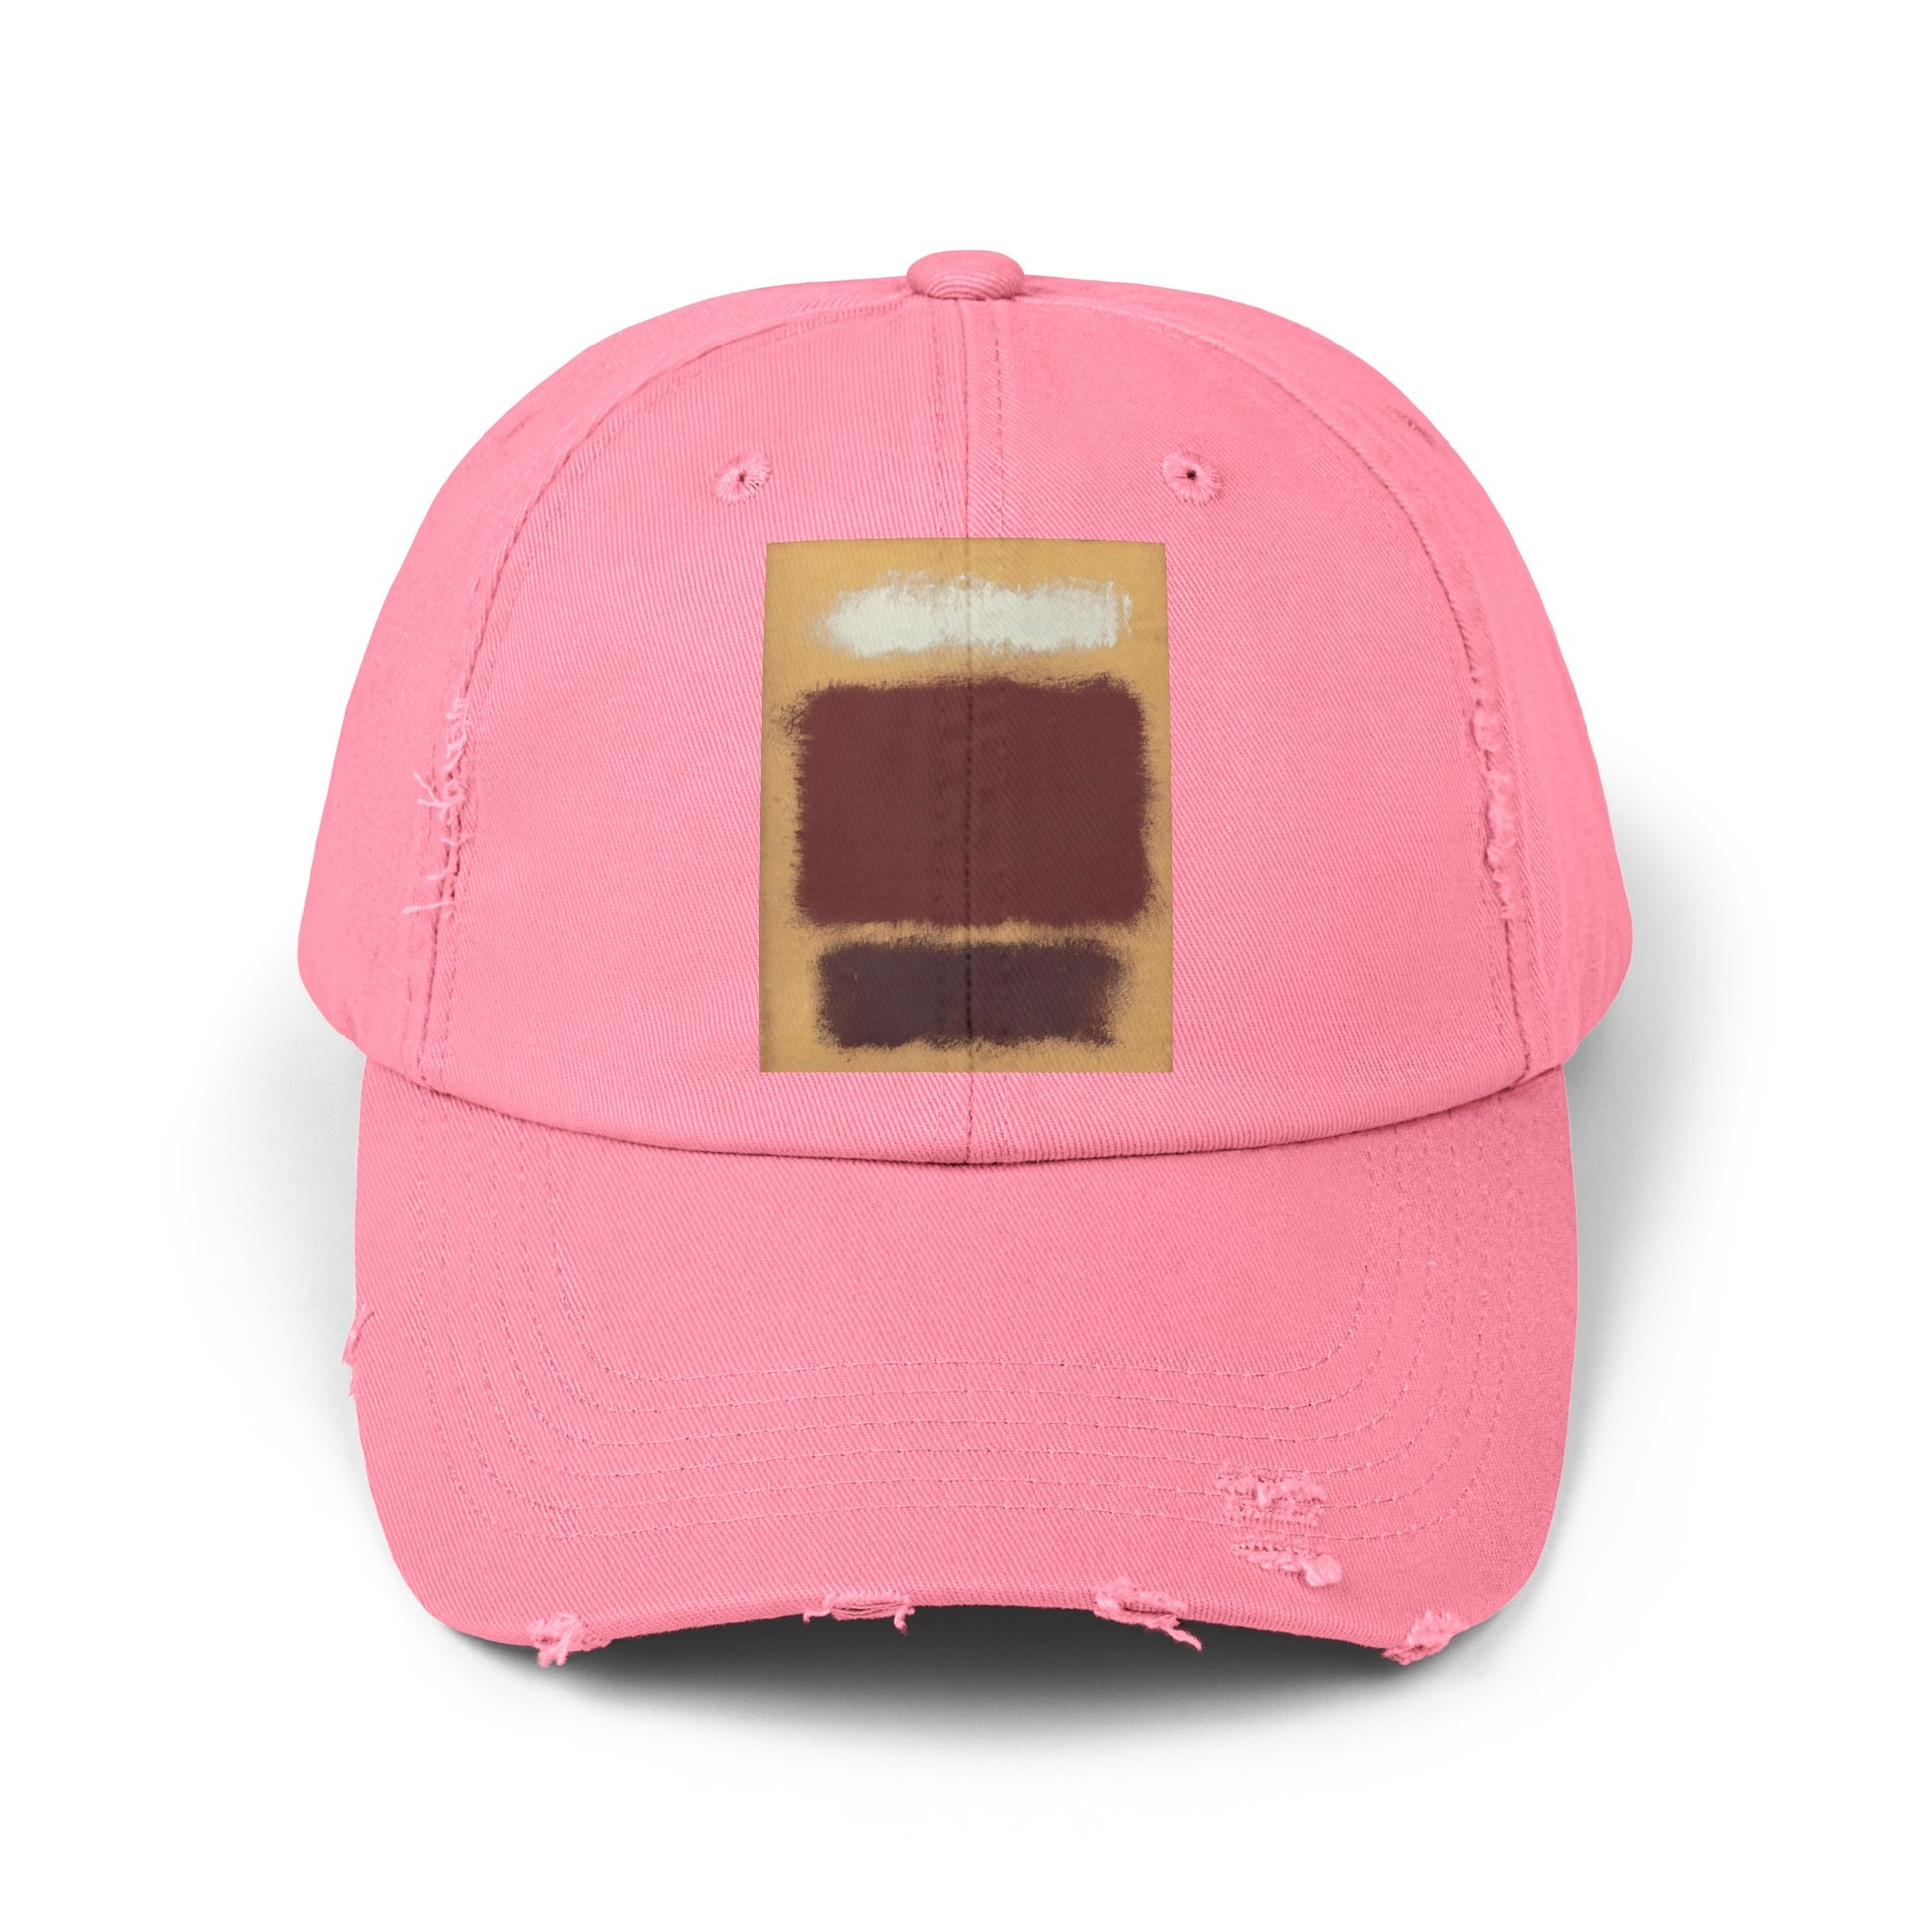 a pink hat with a brown square on it